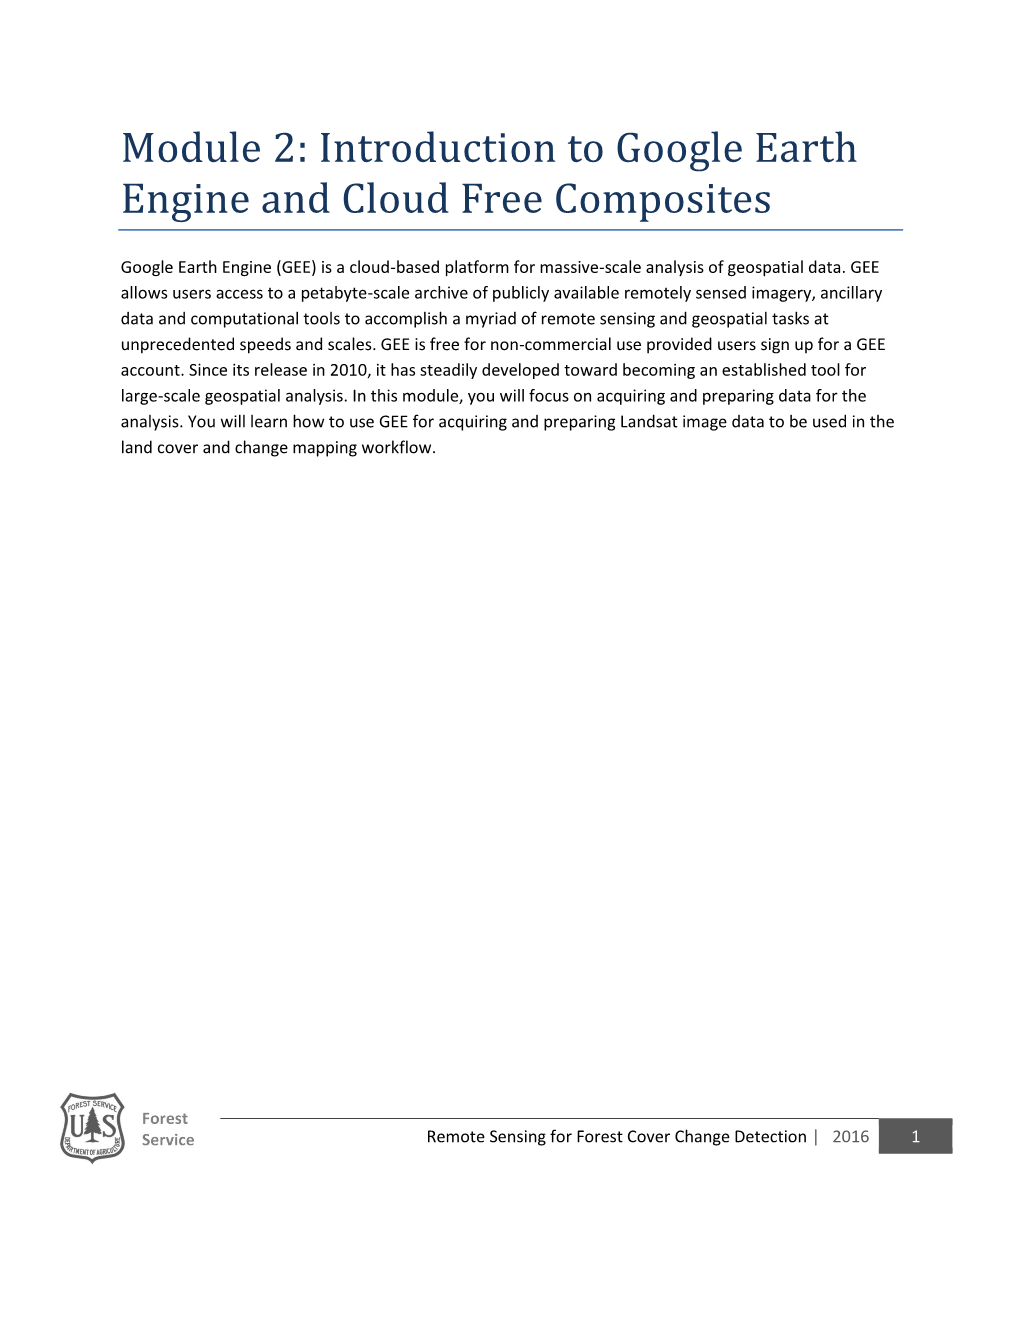 Introduction to Google Earth Engine and Cloud Free Composites